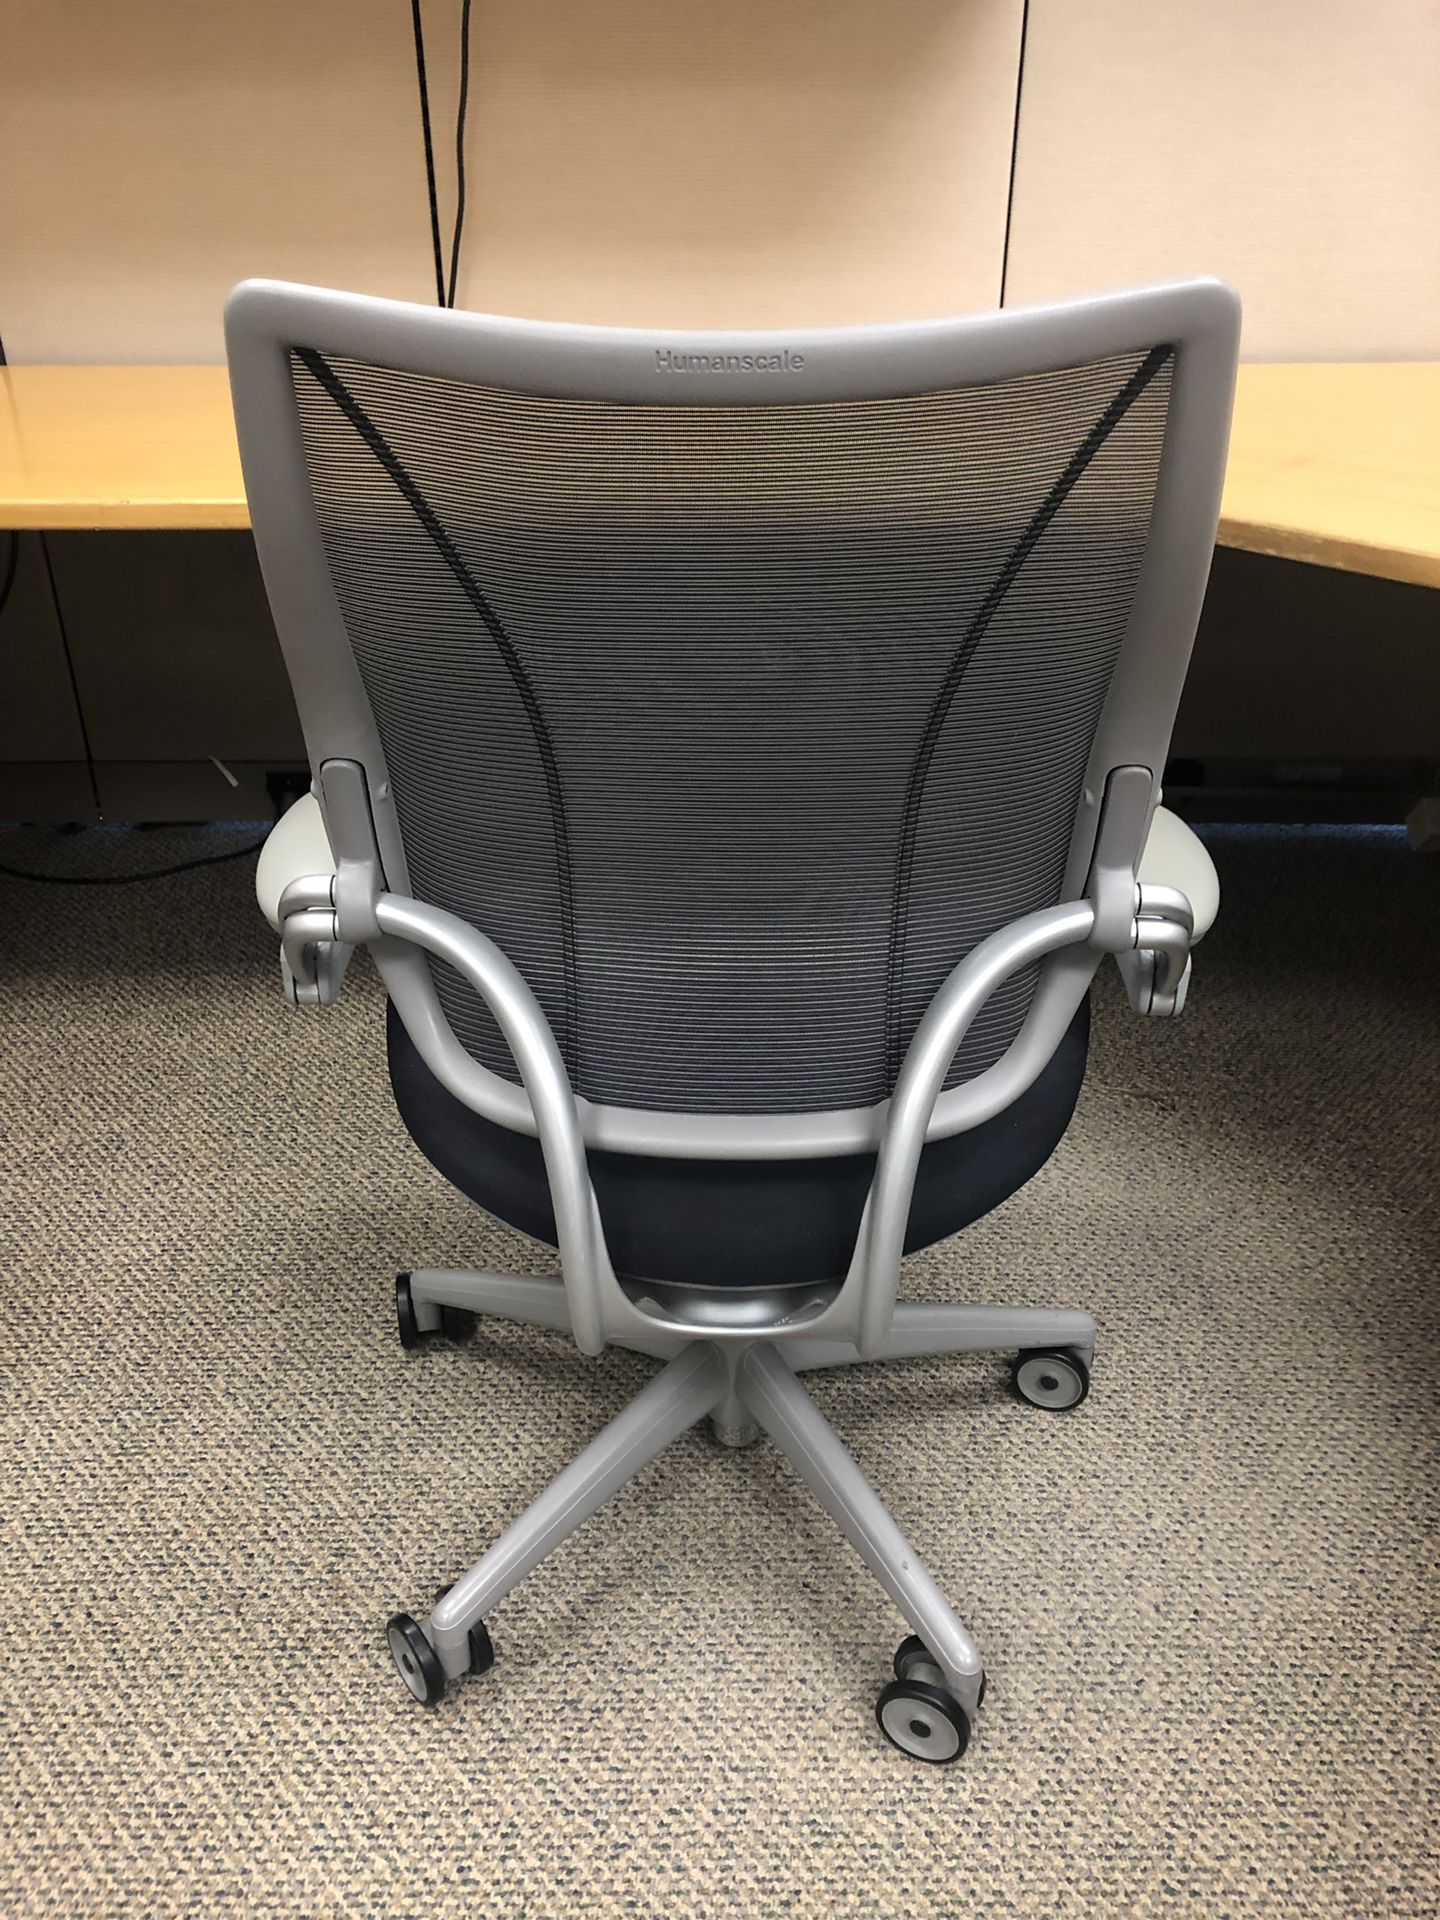 Black and grey humanscale office chair